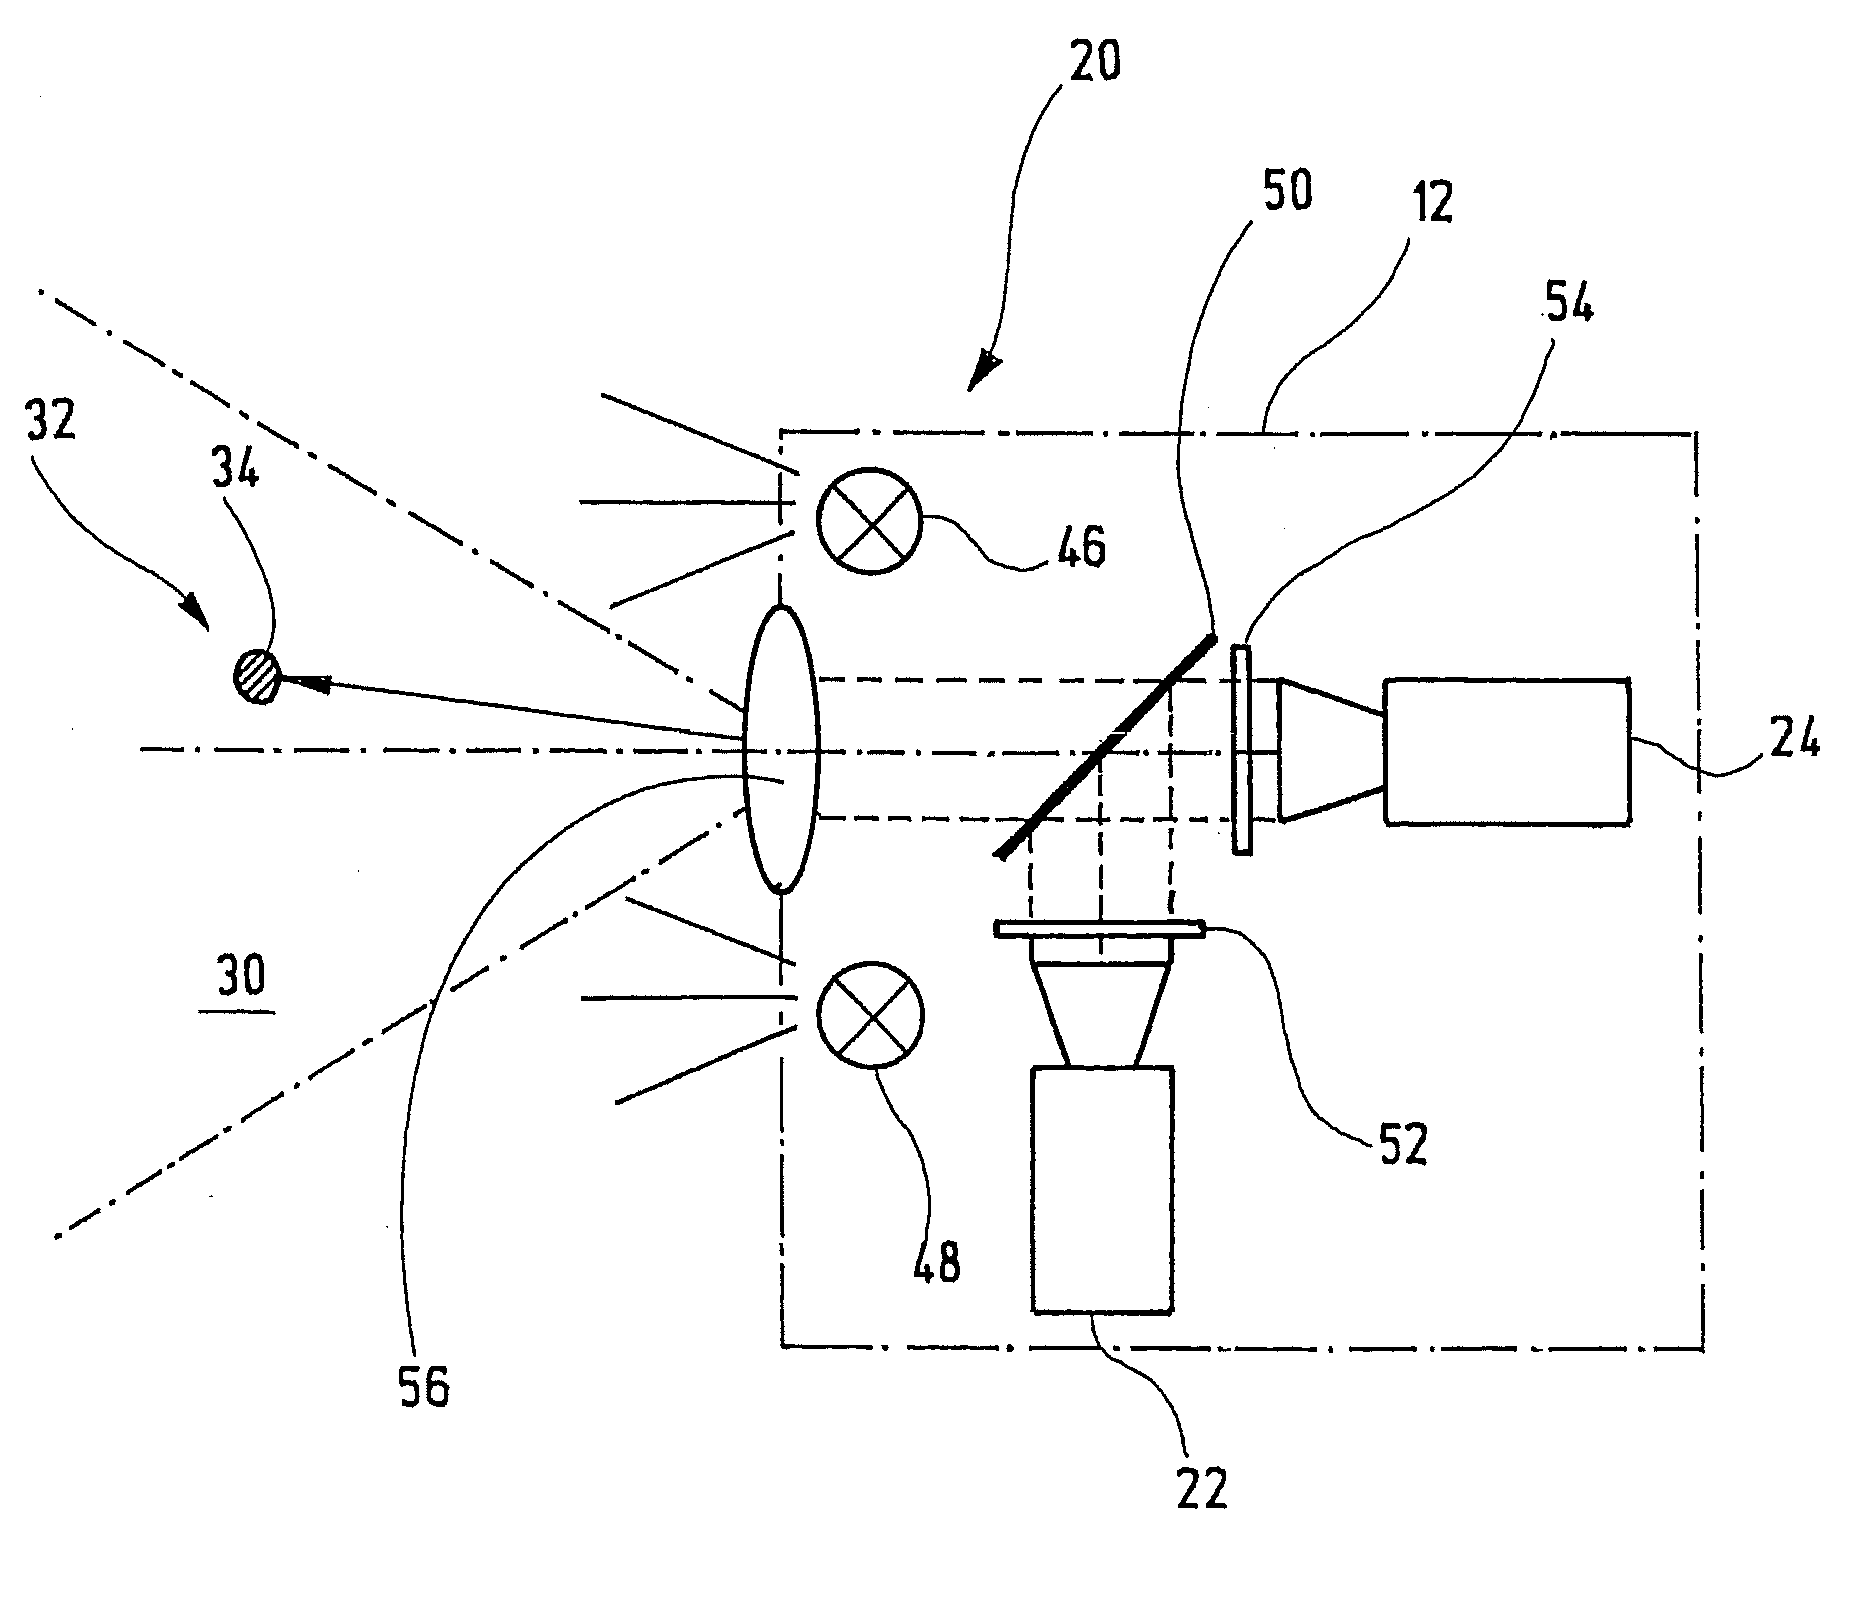 Apparatus and method for monitoring a spatial area, in particular for safeguarding a hazardous area of an automatically operated installation